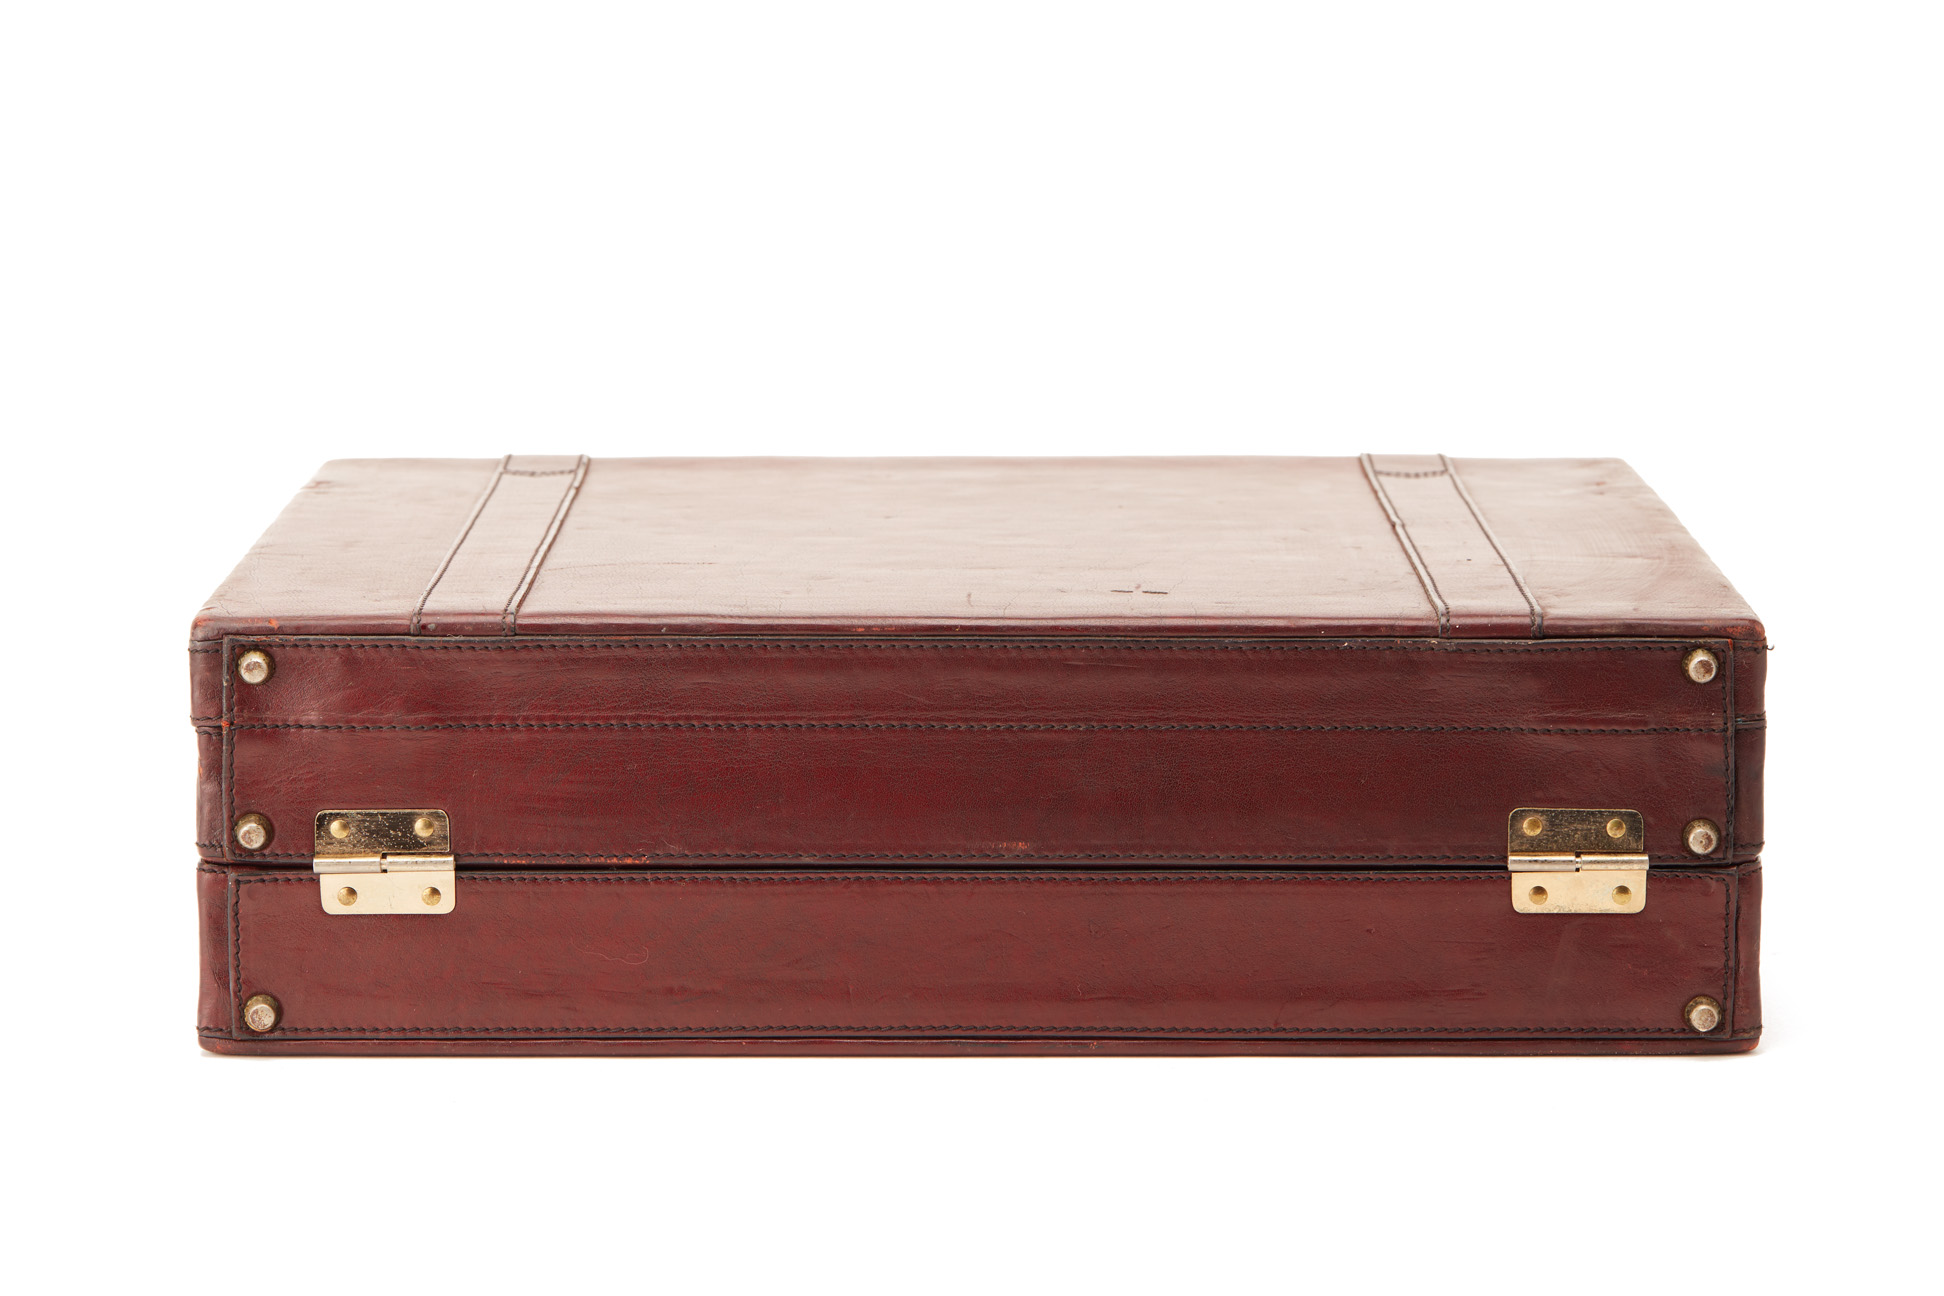 A GOLDPFEIL SPORT OX BLOOD BRIEFCASE - Image 4 of 4